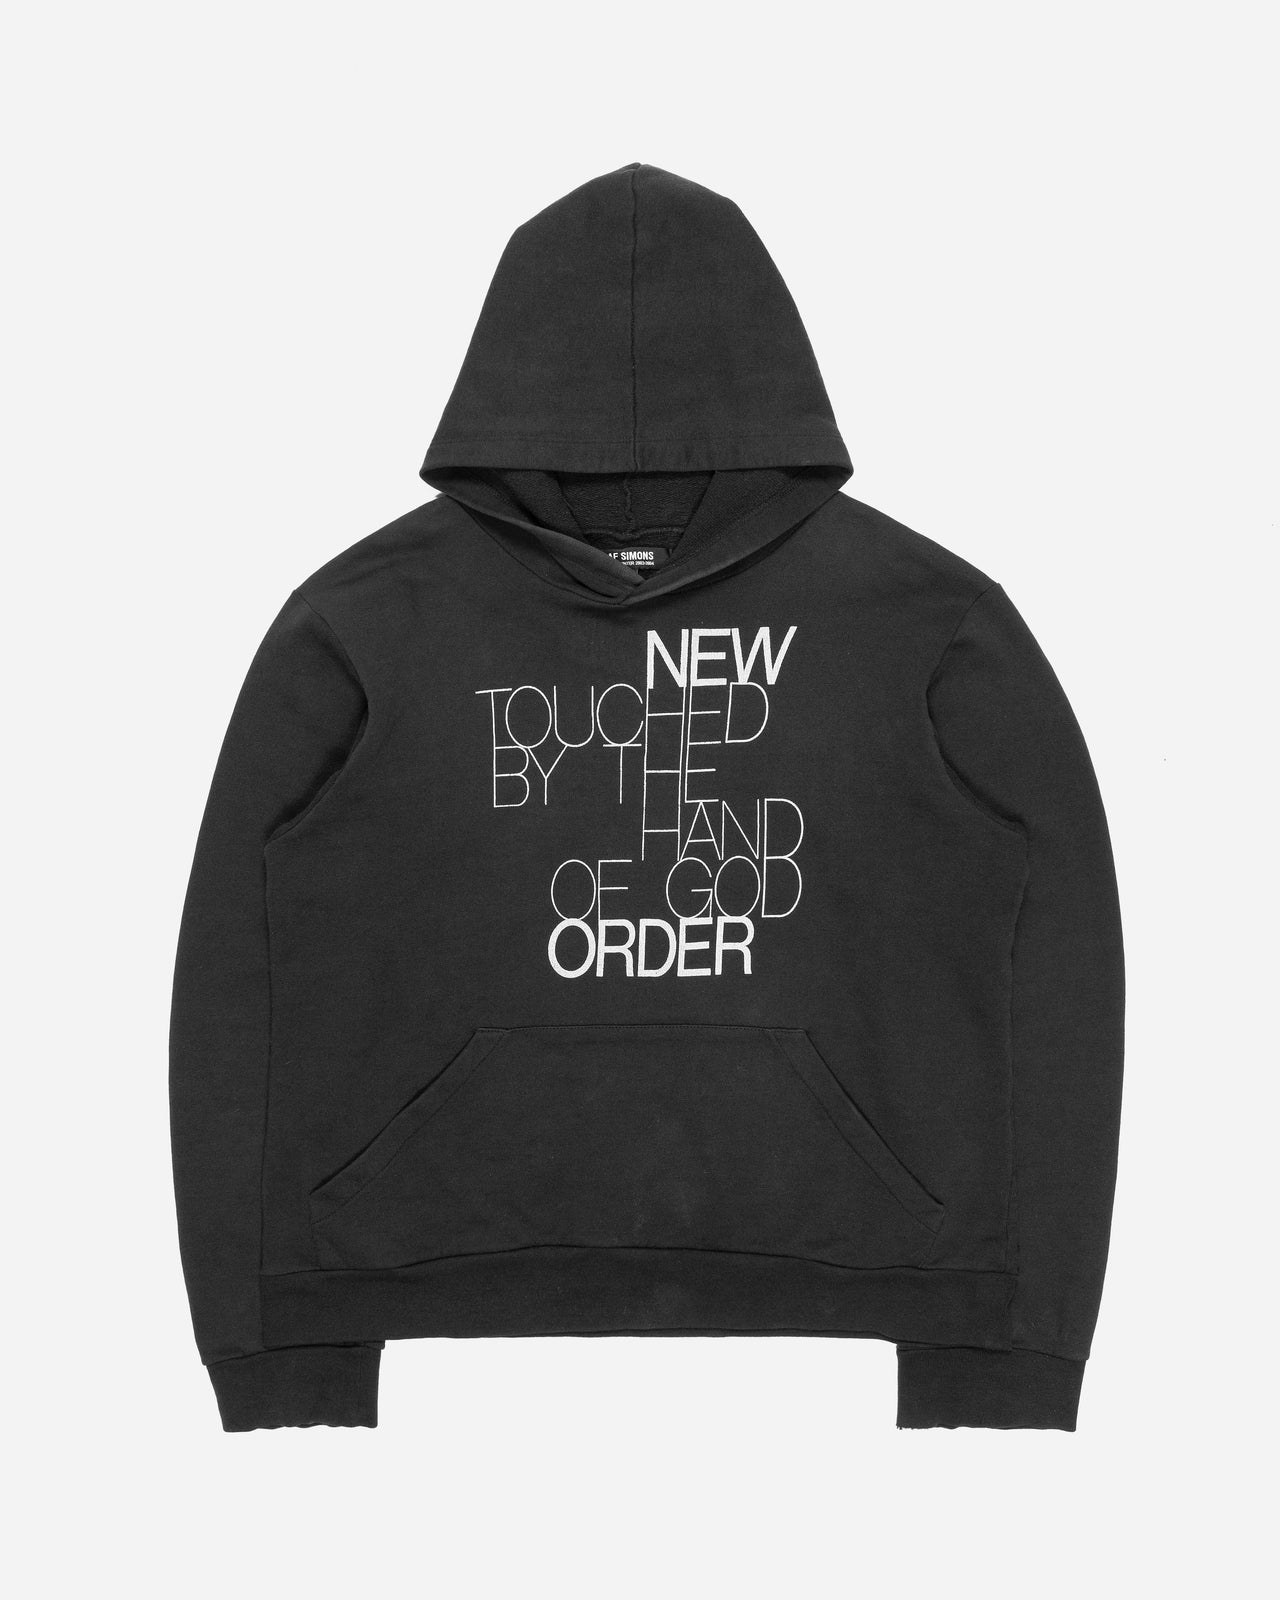 Raf Simons New Order "Touched By The Hand Of God" Hoodie - AW03 “Closer”